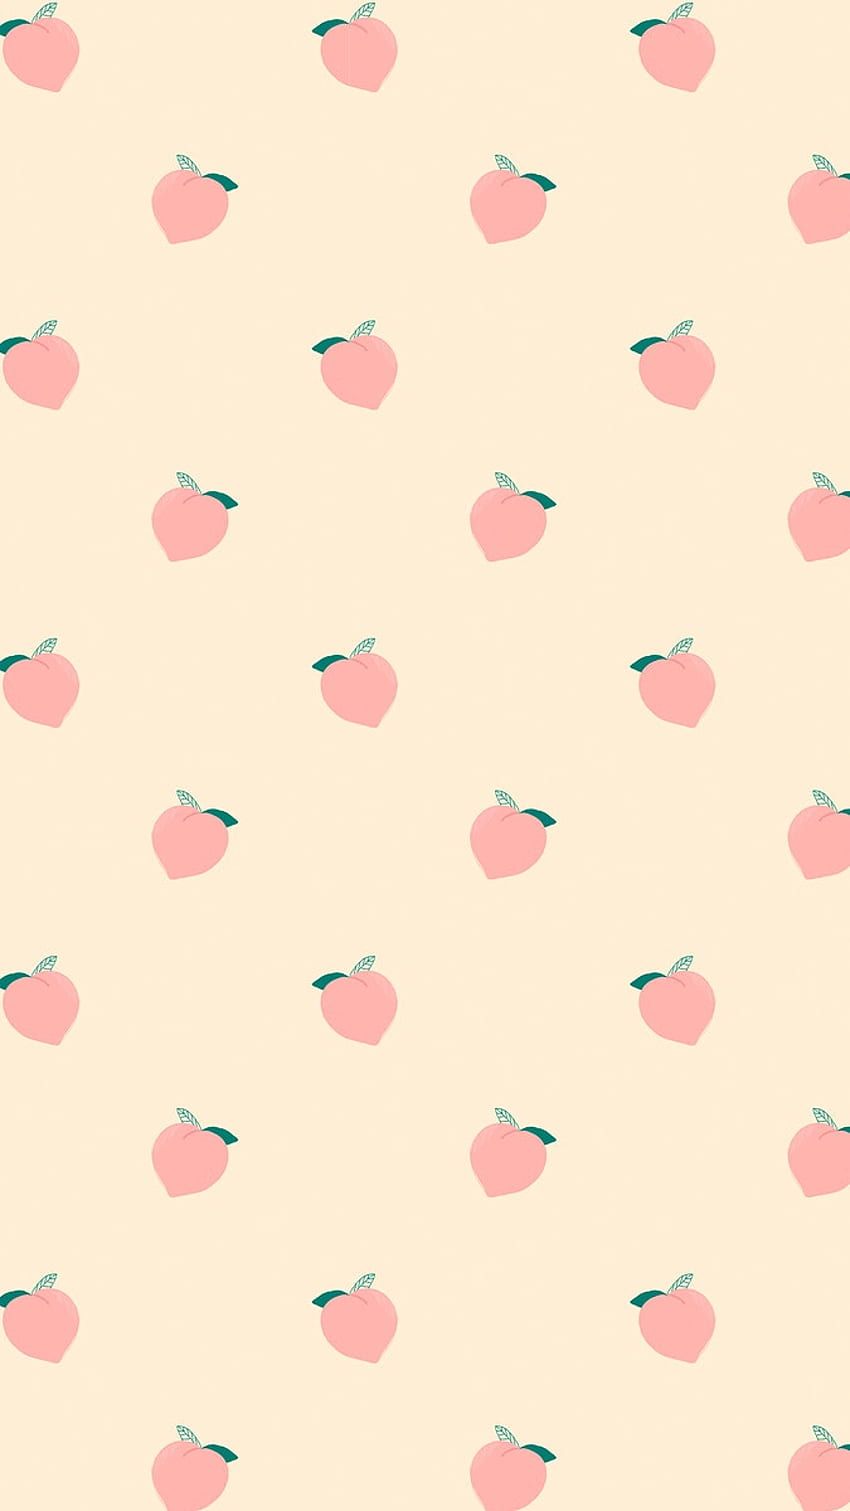 Aesthetic wallpaper for phone with peach. - Peach, vector